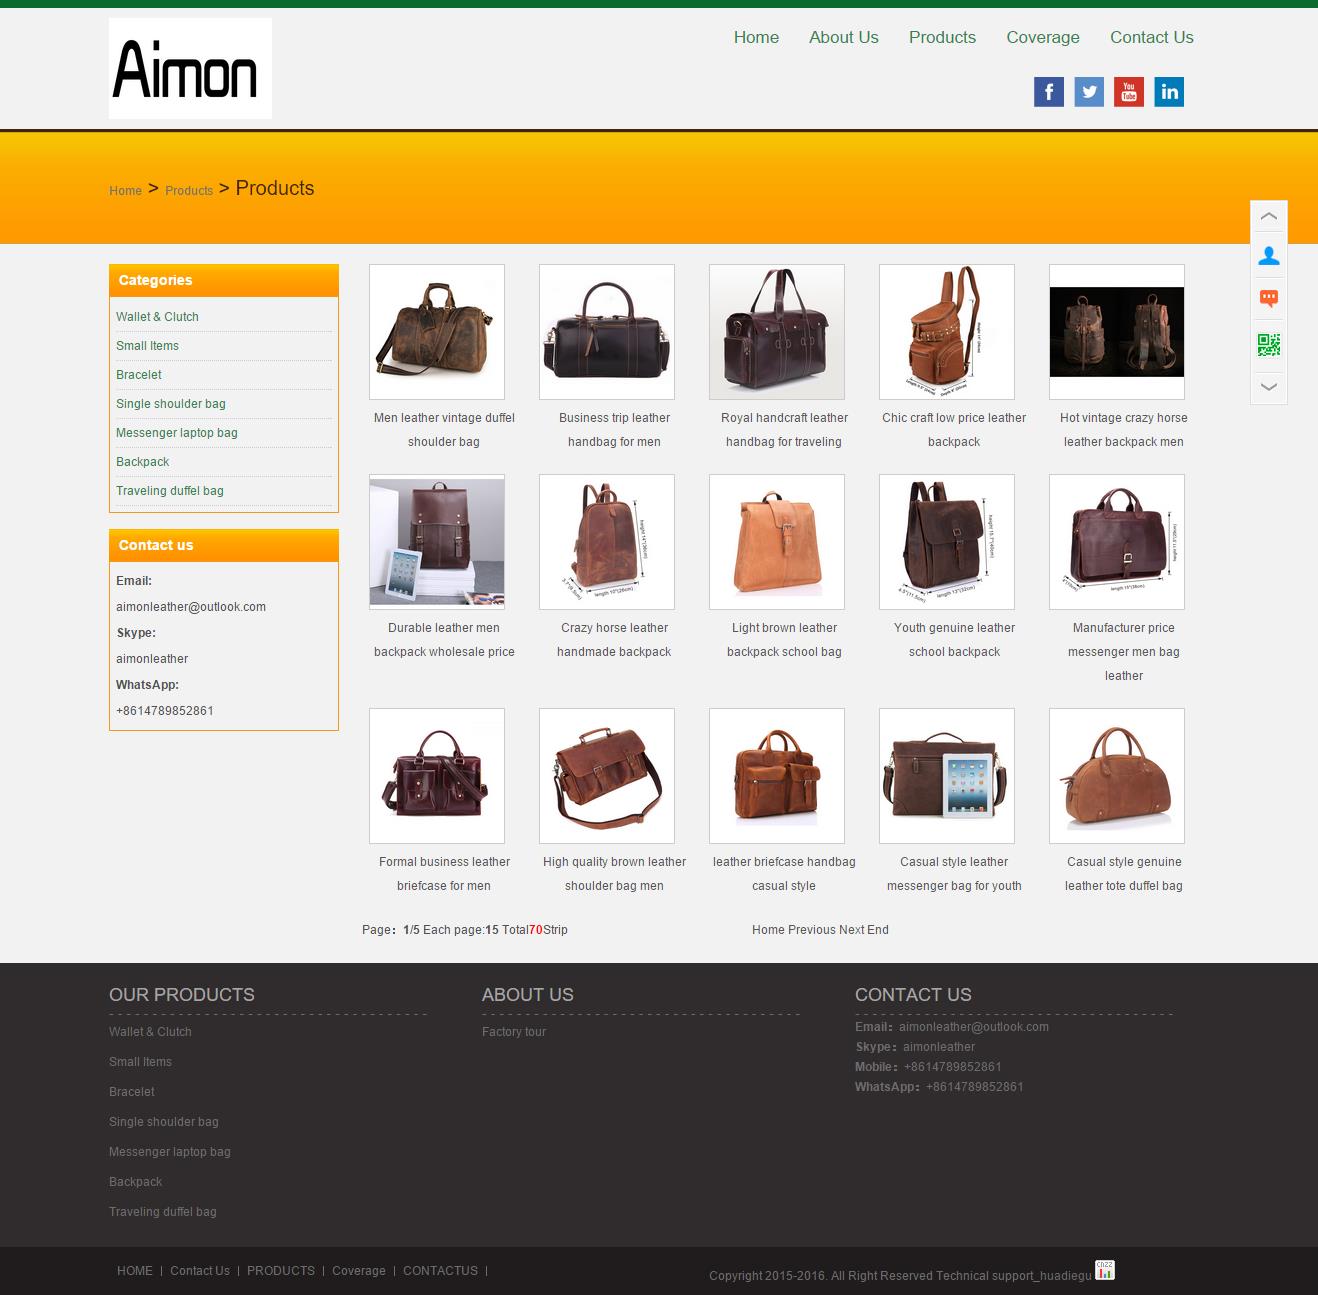 Guangzhou Aimon Leather Industrial Co., Ltd